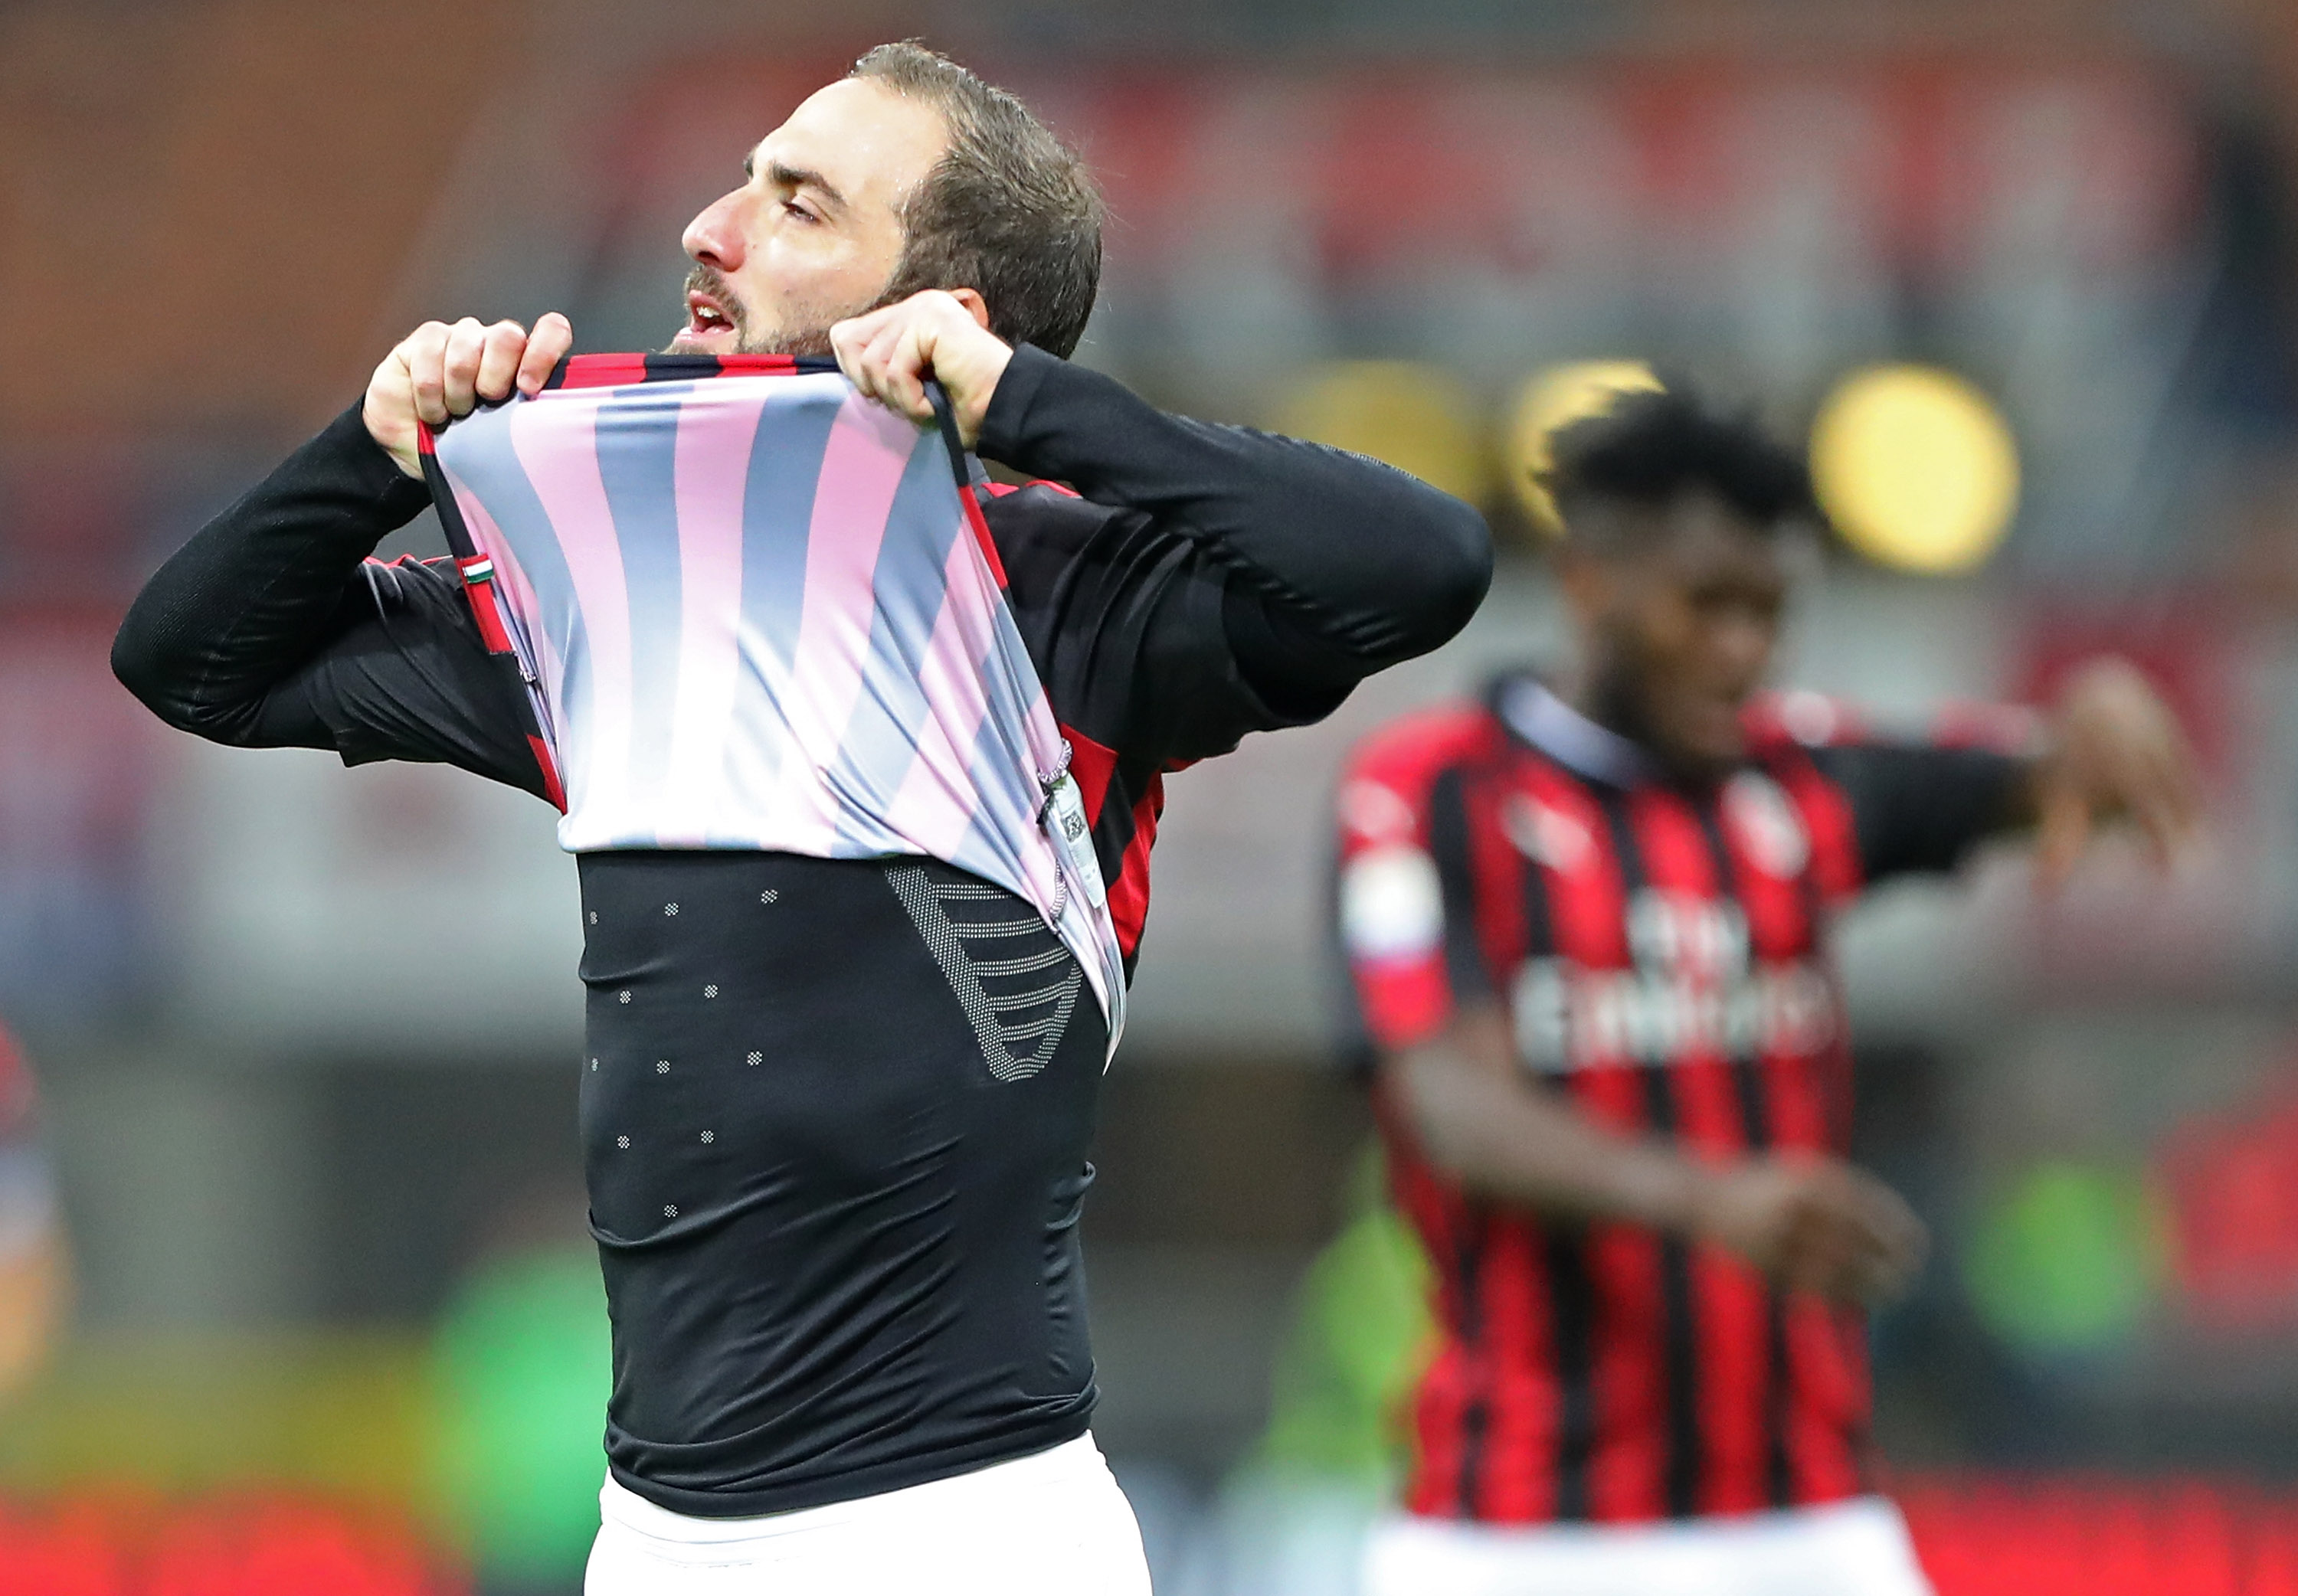 MILAN, ITALY - OCTOBER 31: Gonzalo Higuain of AC Milan reacts after missing a chance of goal during the serie A match between AC Milan and Genoa CFC at Stadio Giuseppe Meazza on October 31, 2018 in Milan, Italy. (Photo by Marco Luzzani/Getty Images)